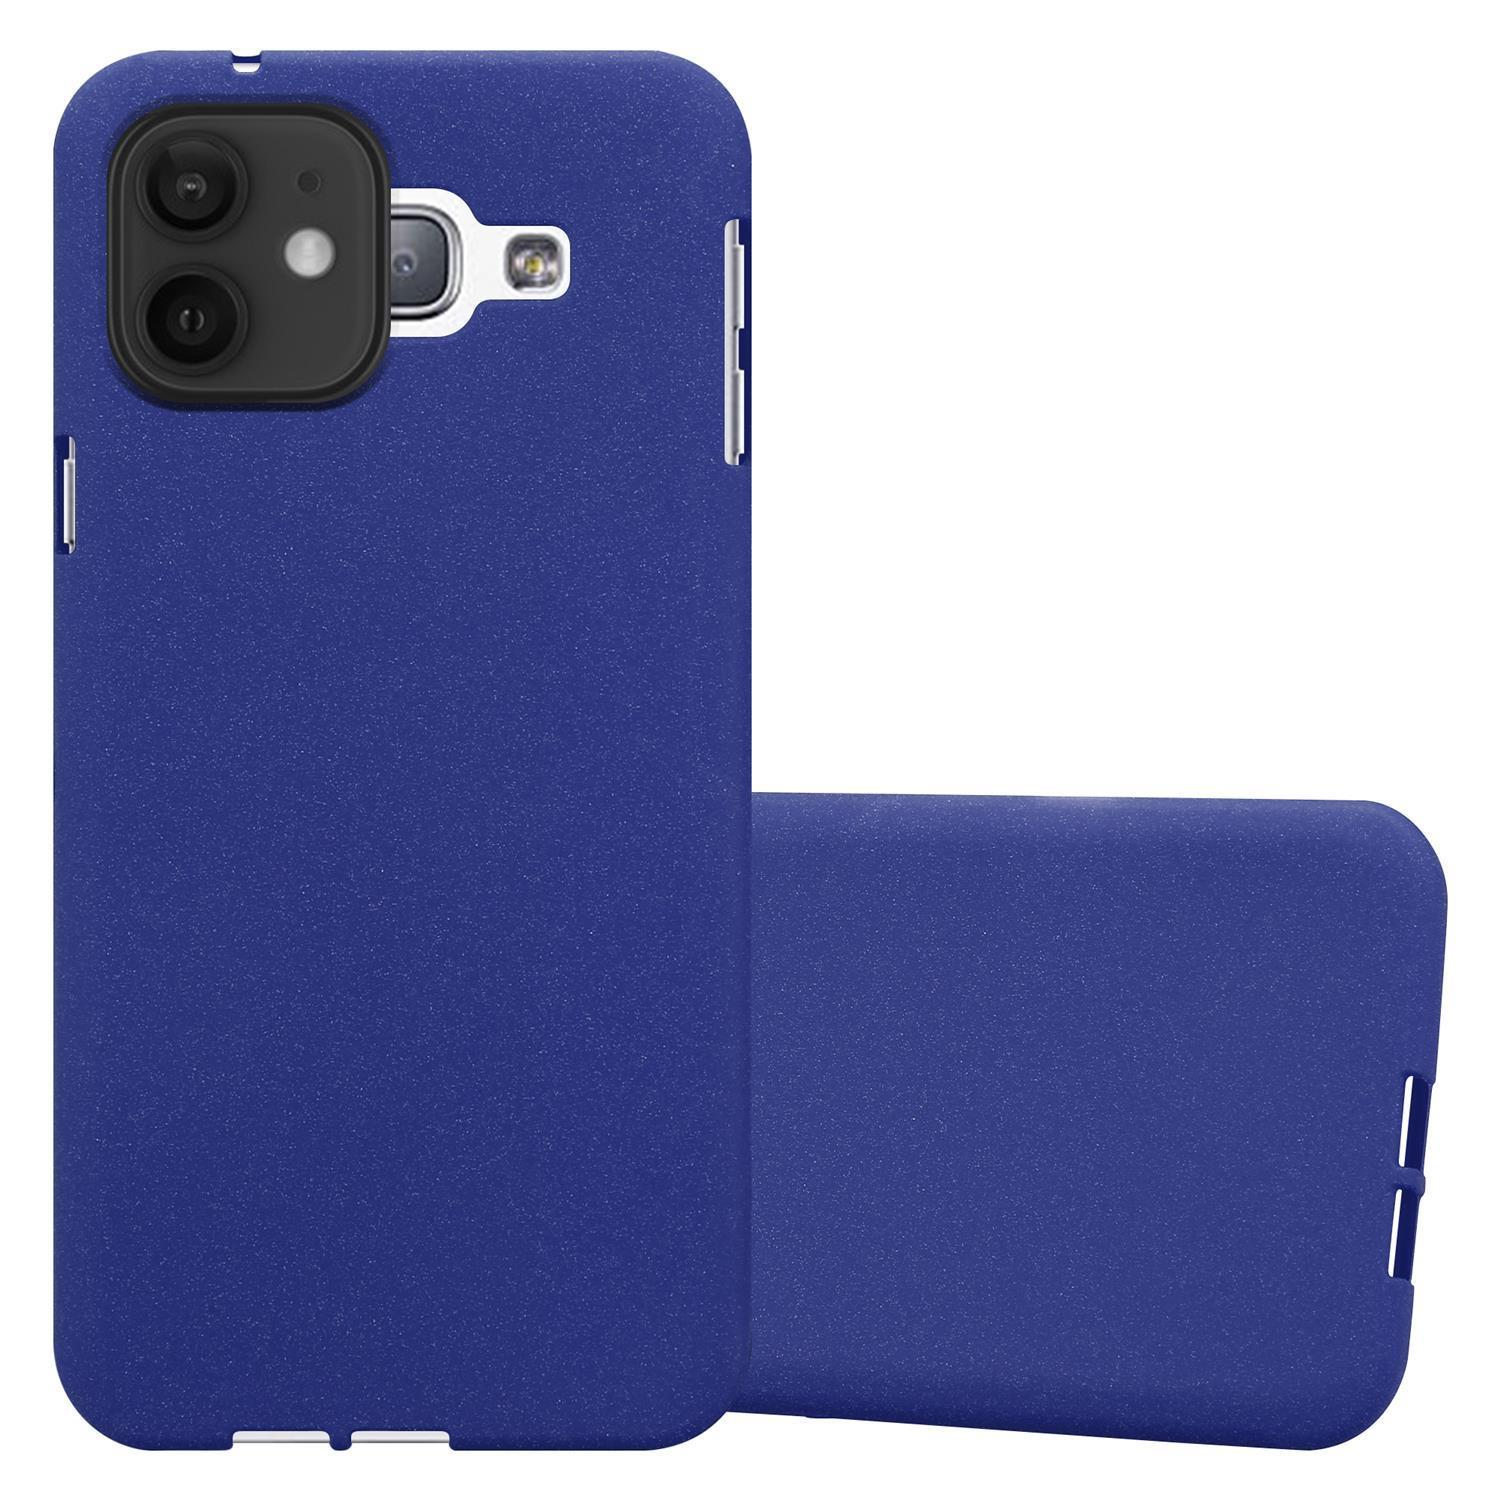 12 iPhone Frosted CADORABO DUNKEL Apple, BLAU Schutzhülle, Backcover, MAX, FROST PRO TPU